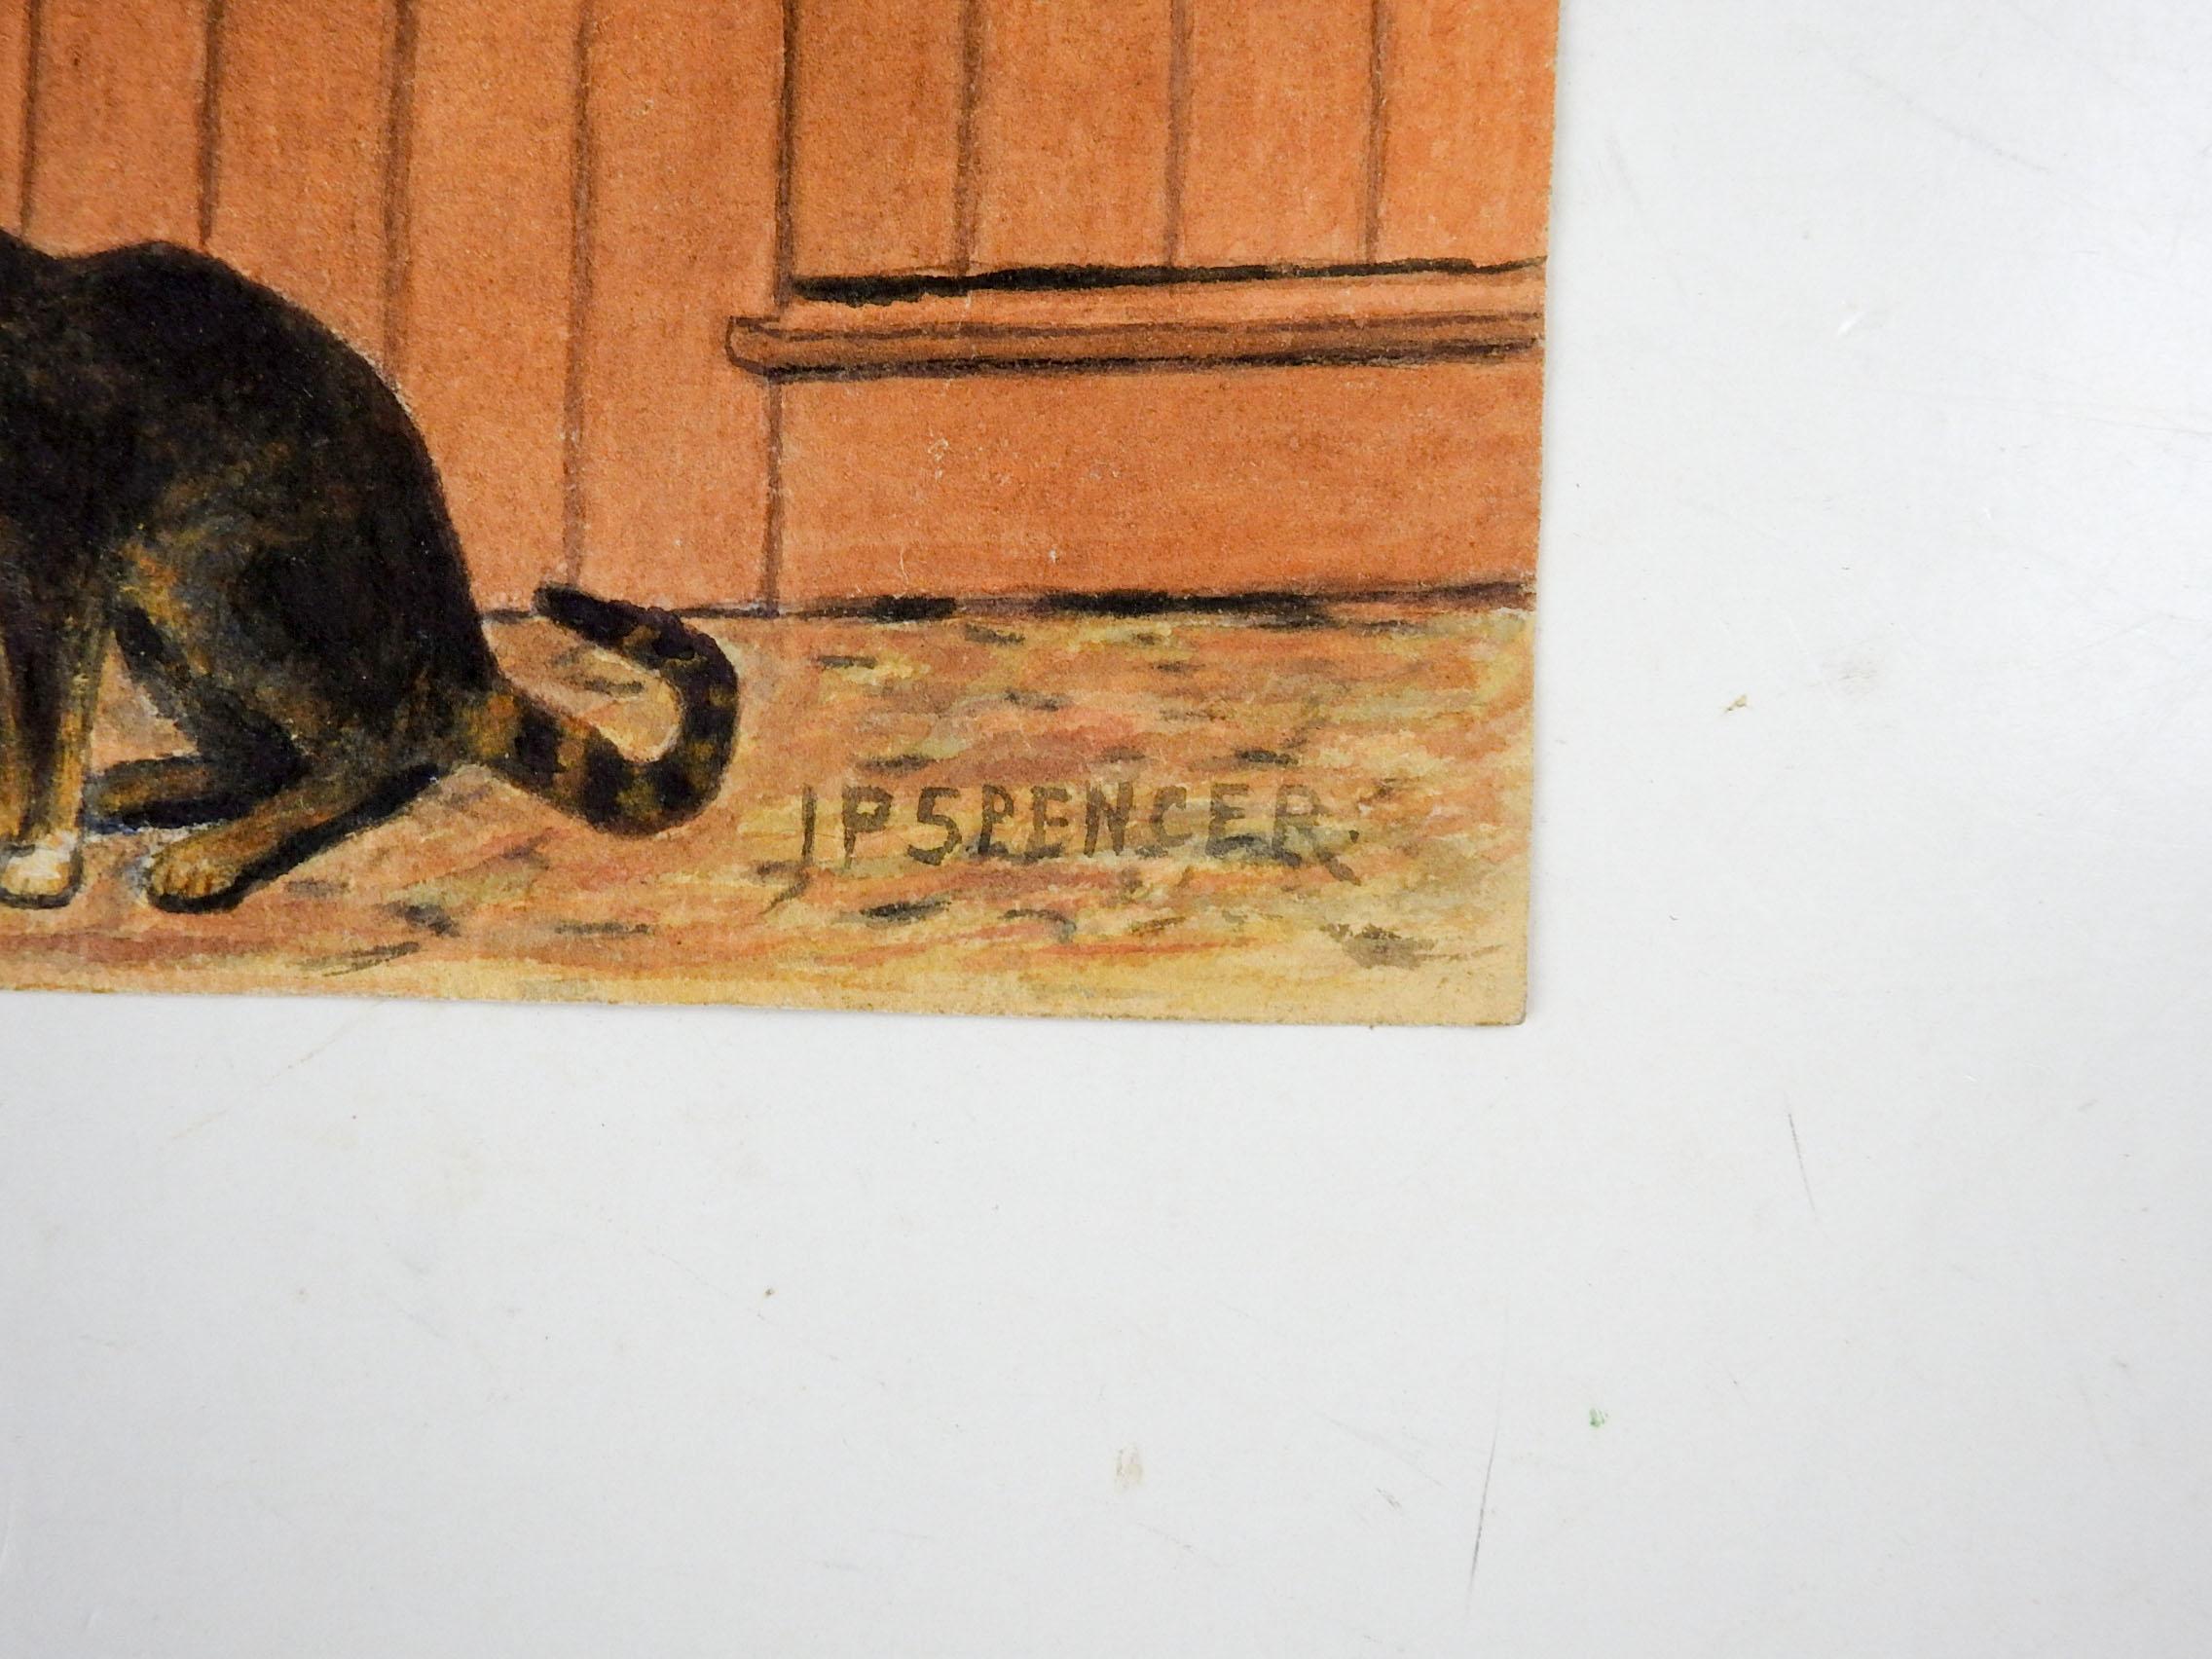 Vintage watercolor on paper painting of a pair of barn cats. Signed Spencer lower right corner. Unframed, age toning.